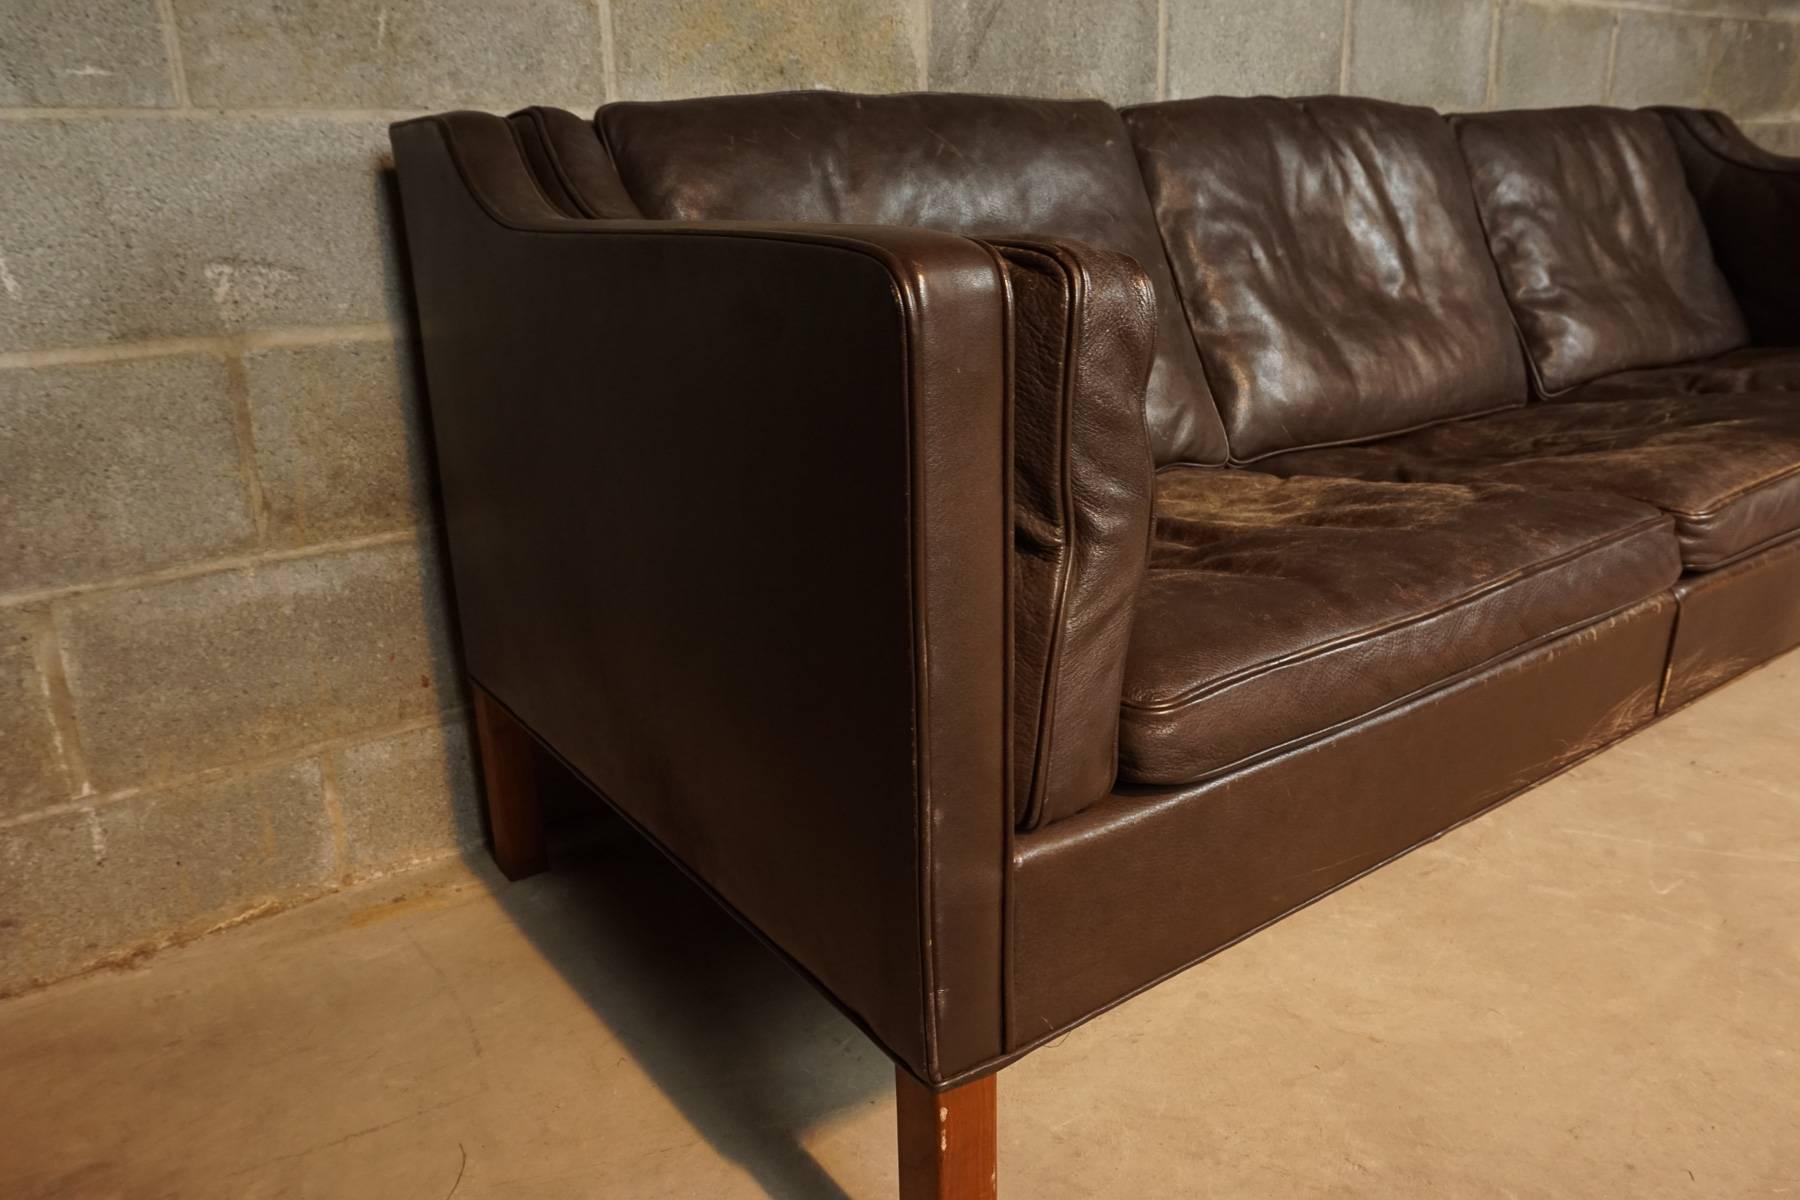 Børge Mogensen sofa model 2213 in brown patinated leather. Loose seat and back cushions with down fill. Produced by Fredericia Stolefabrik, designed in 1963. Original label underneath.